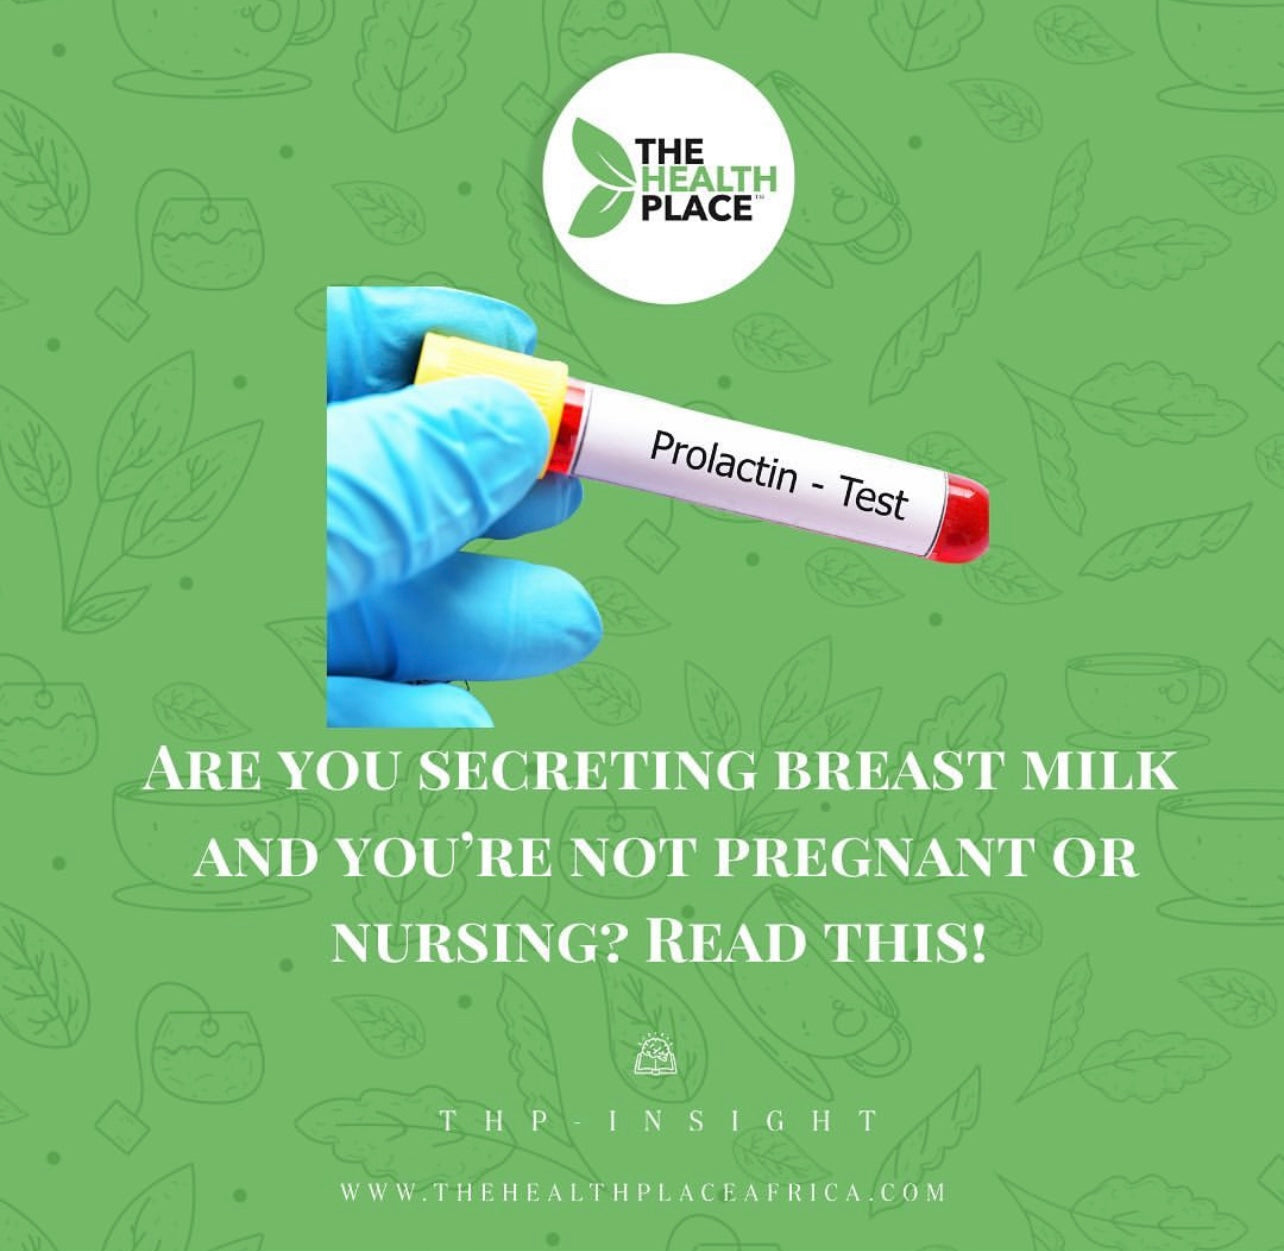 ARE YOU SECRETING BREAST MILK EVEN THOUGH YOU ARE NOT PREGNANT OR NURSING? READ THIS